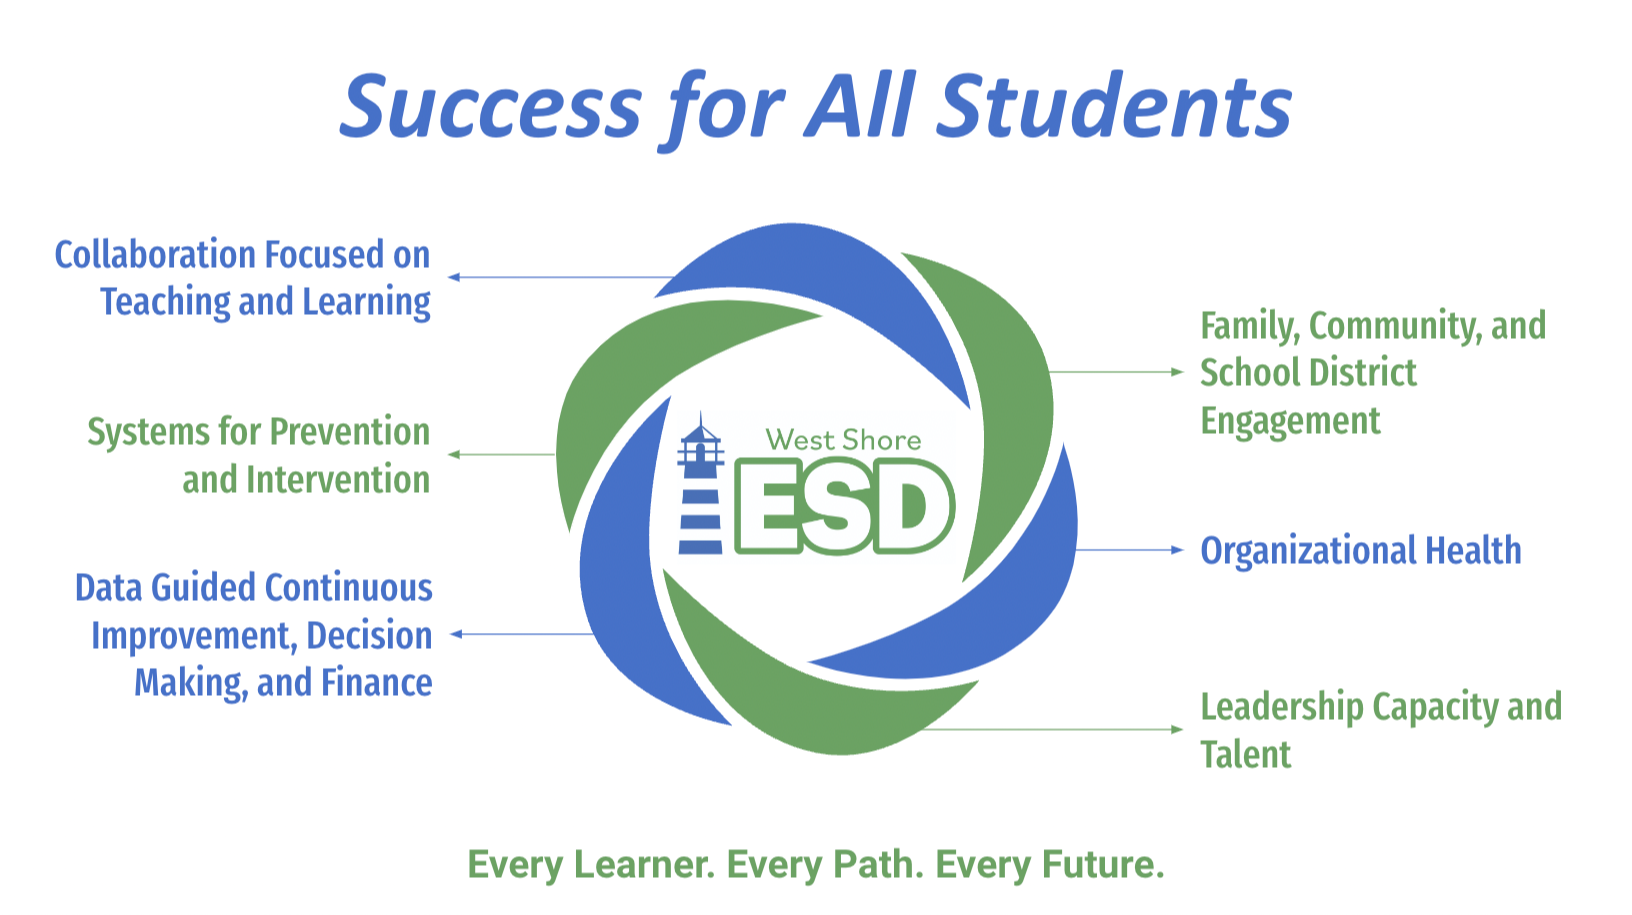 West Shore Educational Service District Six Point Plan. Vision & Goal: Success for All Students 1. Improve Organizational  Health. 2. Implement Systems for prevention and intervention. 3. Collaboration Focused on Teaching and Learning. 4. Use Data to Guide Decision Making, Continuous Improvement & Finance, 5. Engage Family, Community, and Constituent School Districts. 6. Build Leadership Capacity & Develop Talent. Core Values: Student Focus, Servant Leadership, Collaborative Communities. 